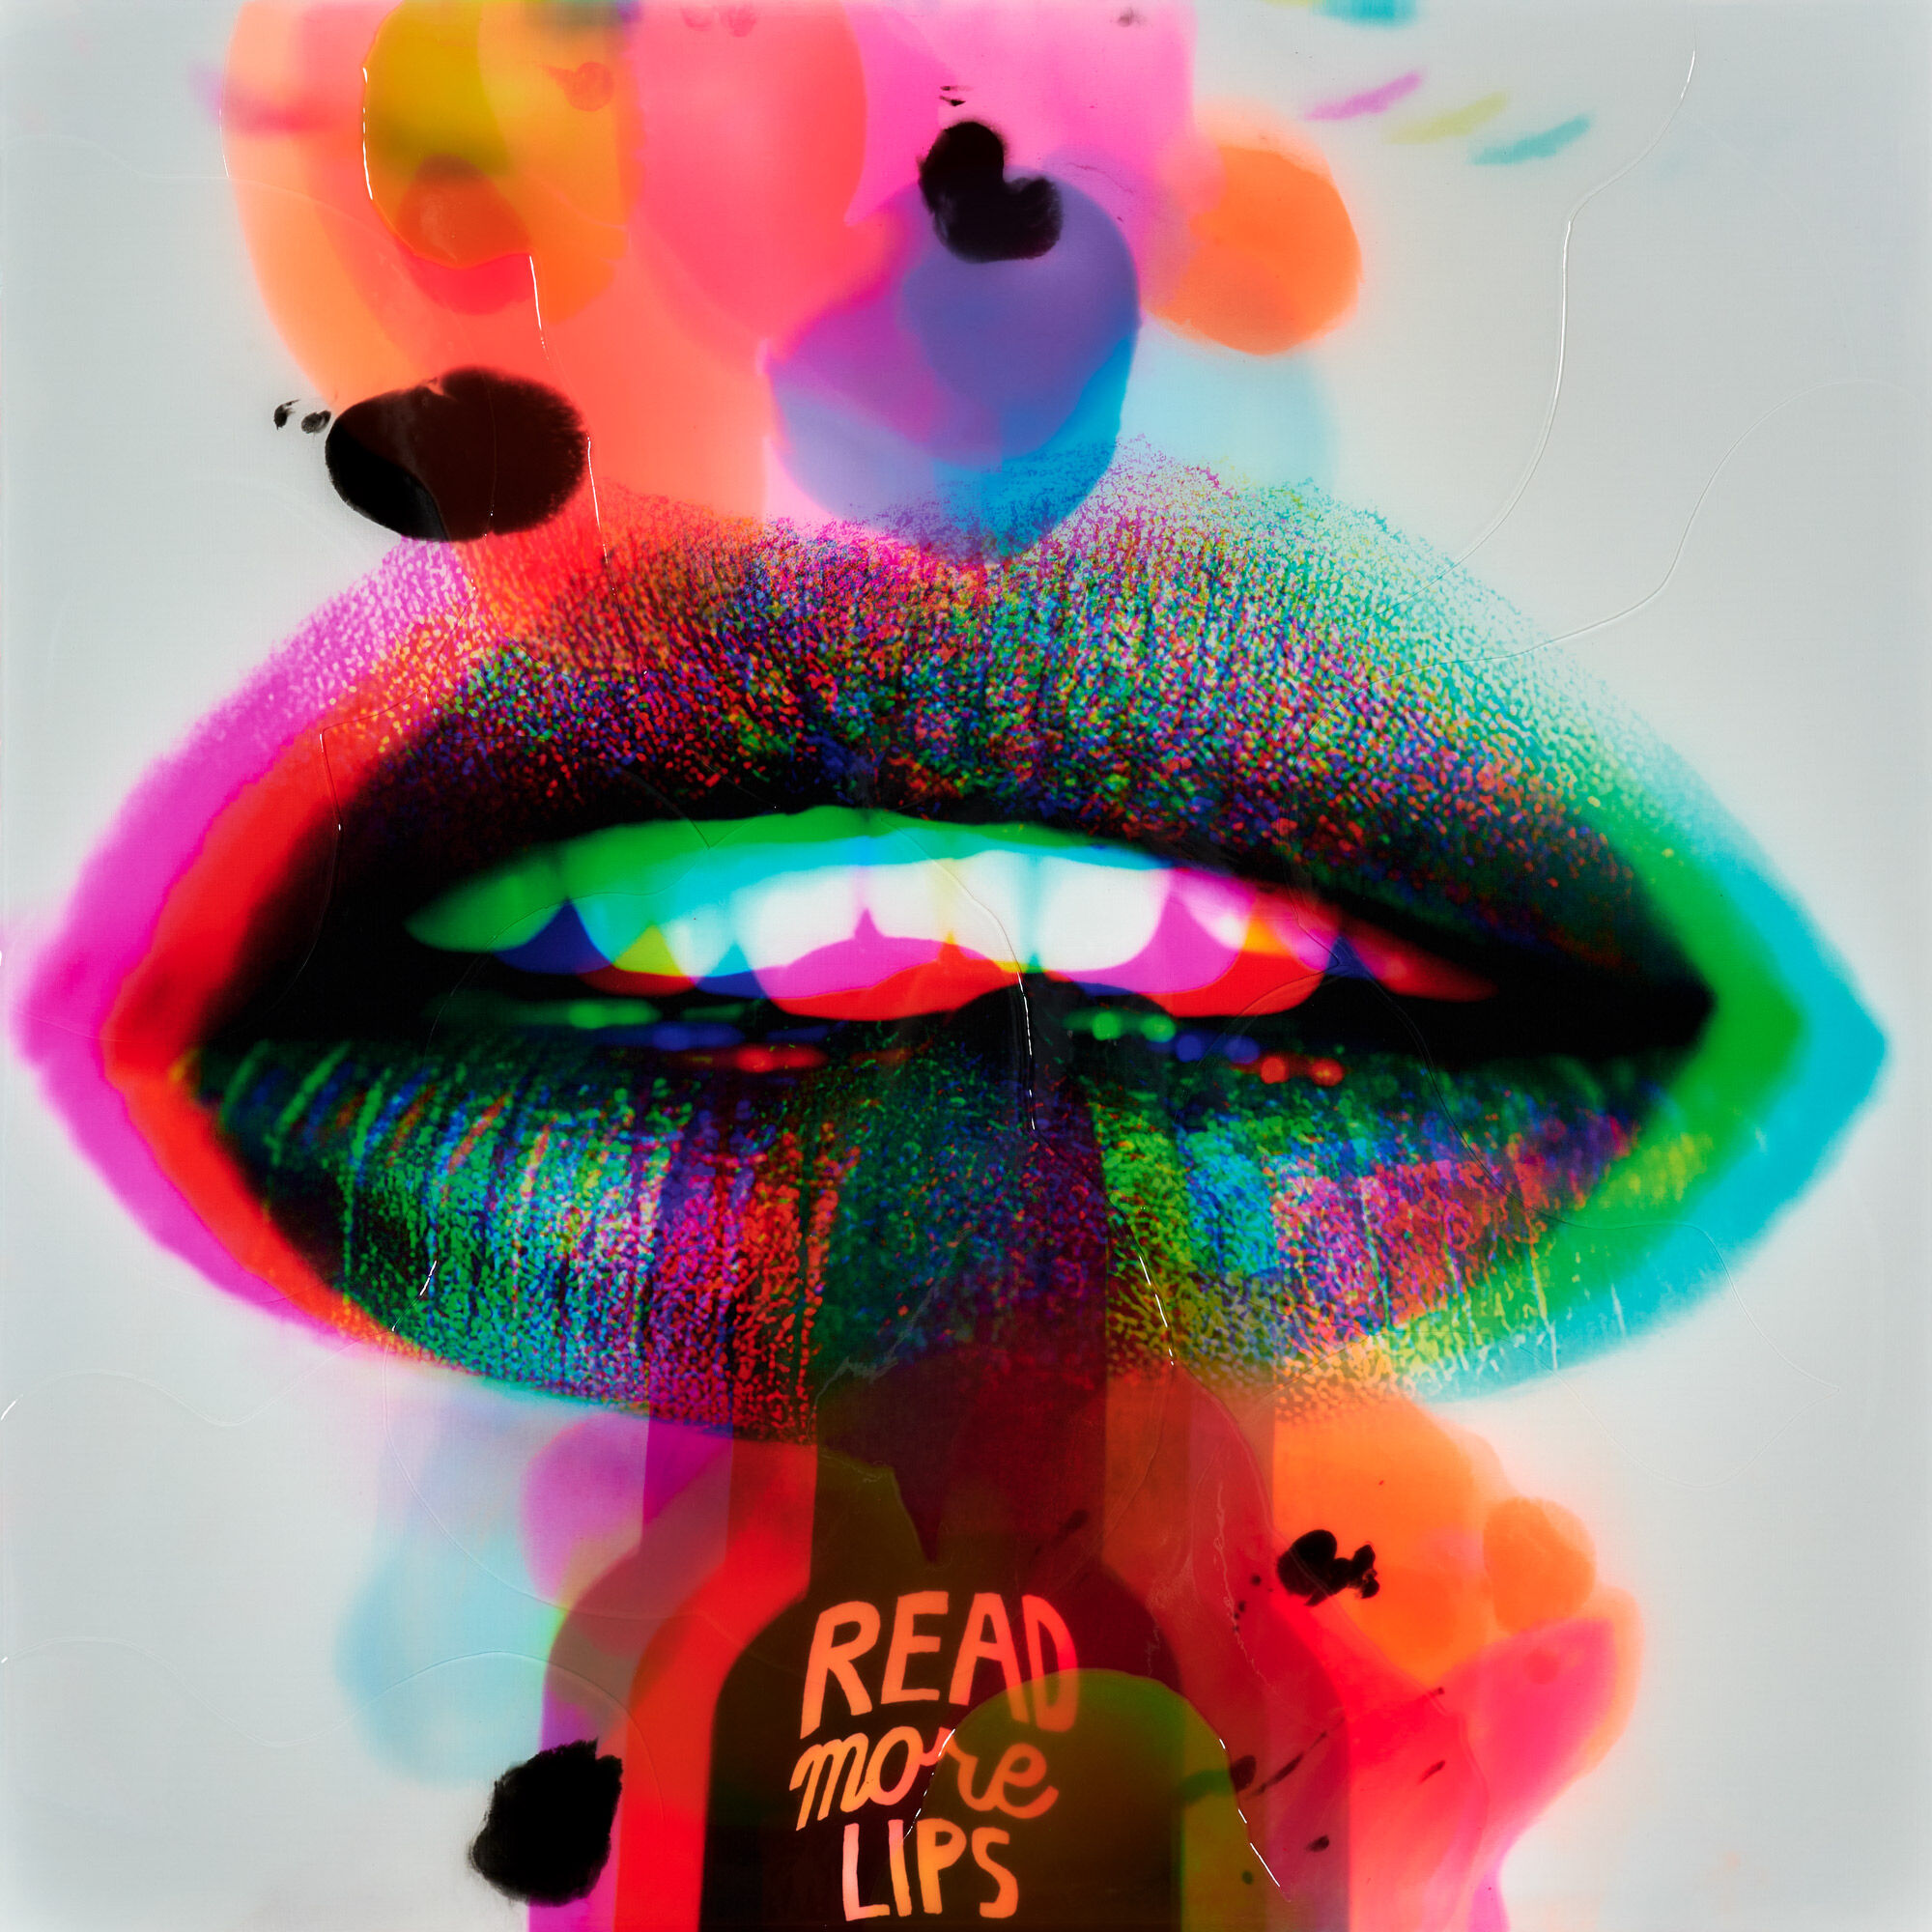 Picture "Read more lips" (2021) by Jörg Döring